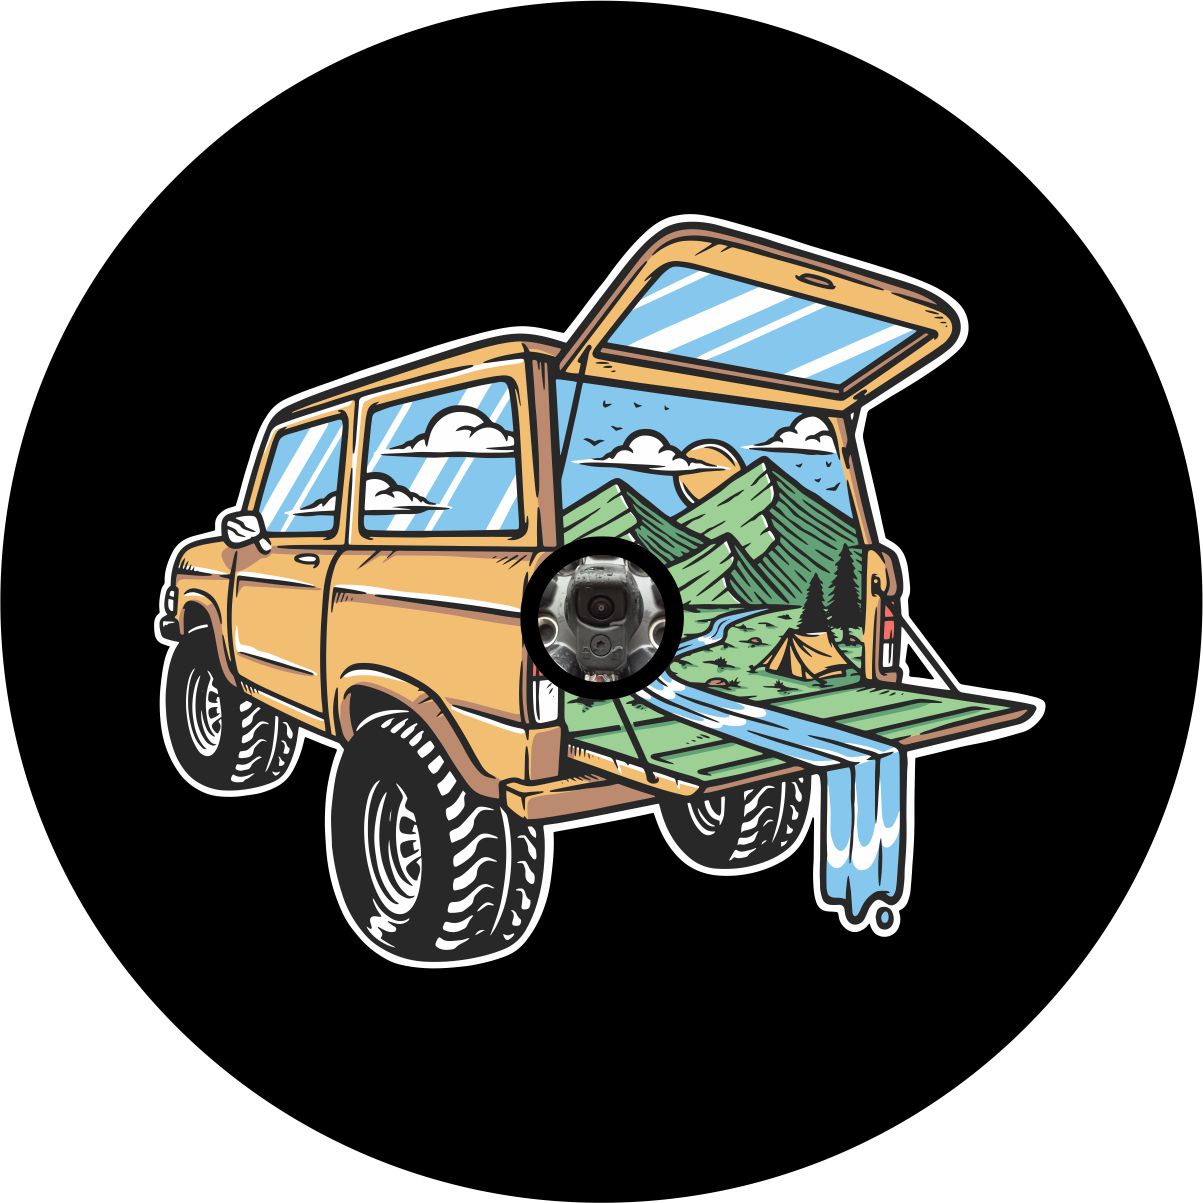 Spare tire cover design with a camera hole for back up camera. A creative and unique spare tire cover design with a Ford Bronco SUV and the mountains and outdoors beautiful camping scene coming out of the back. 